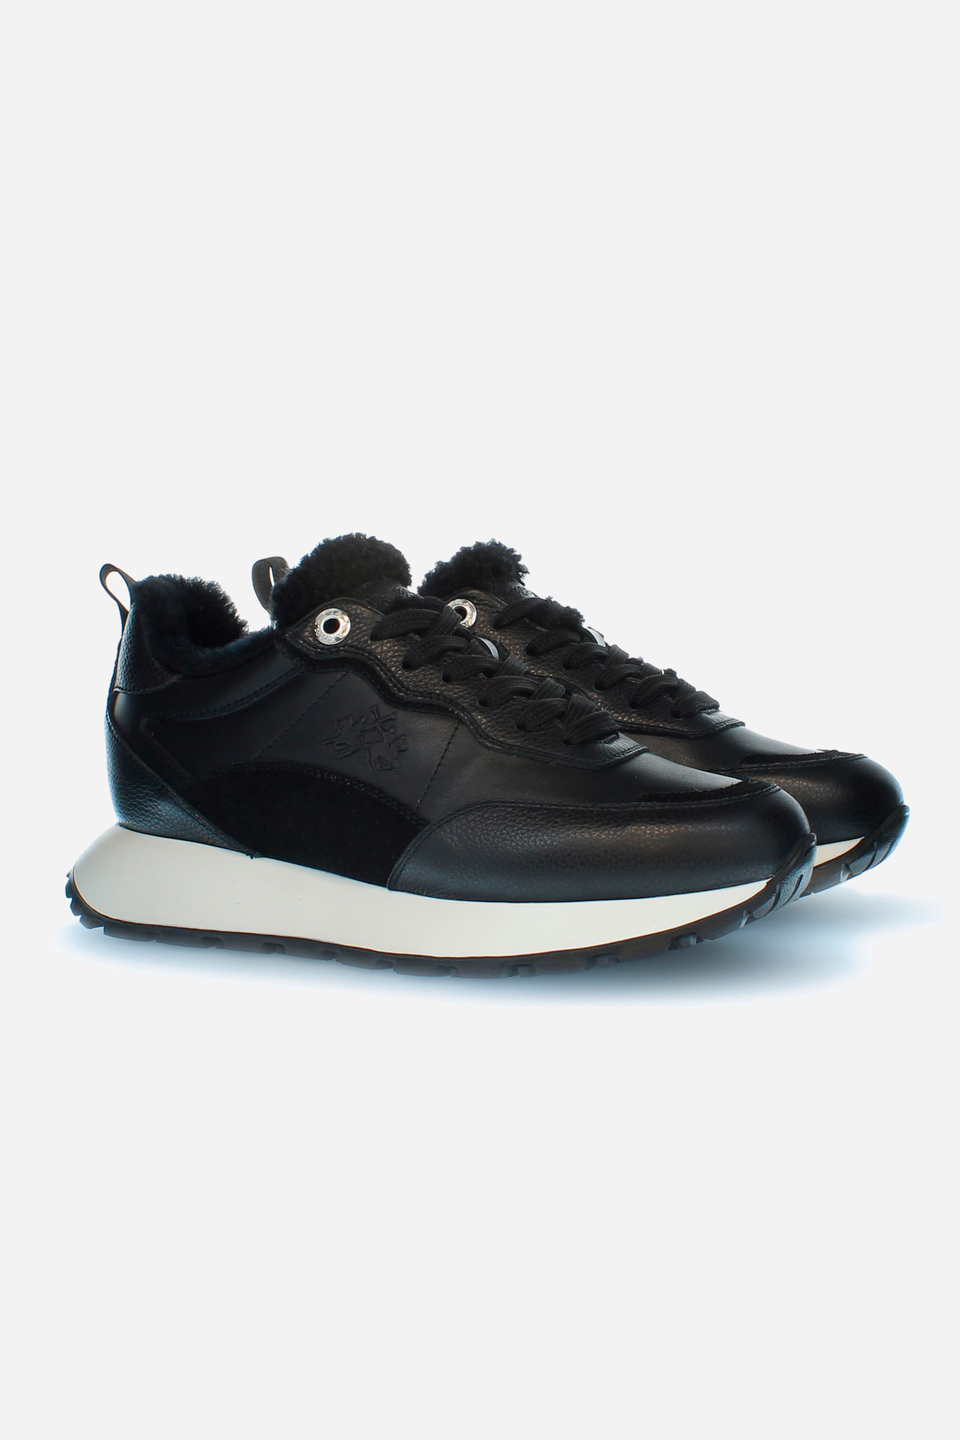 Women's trainer made of soft tumbled leather | La Martina - Official Online Shop